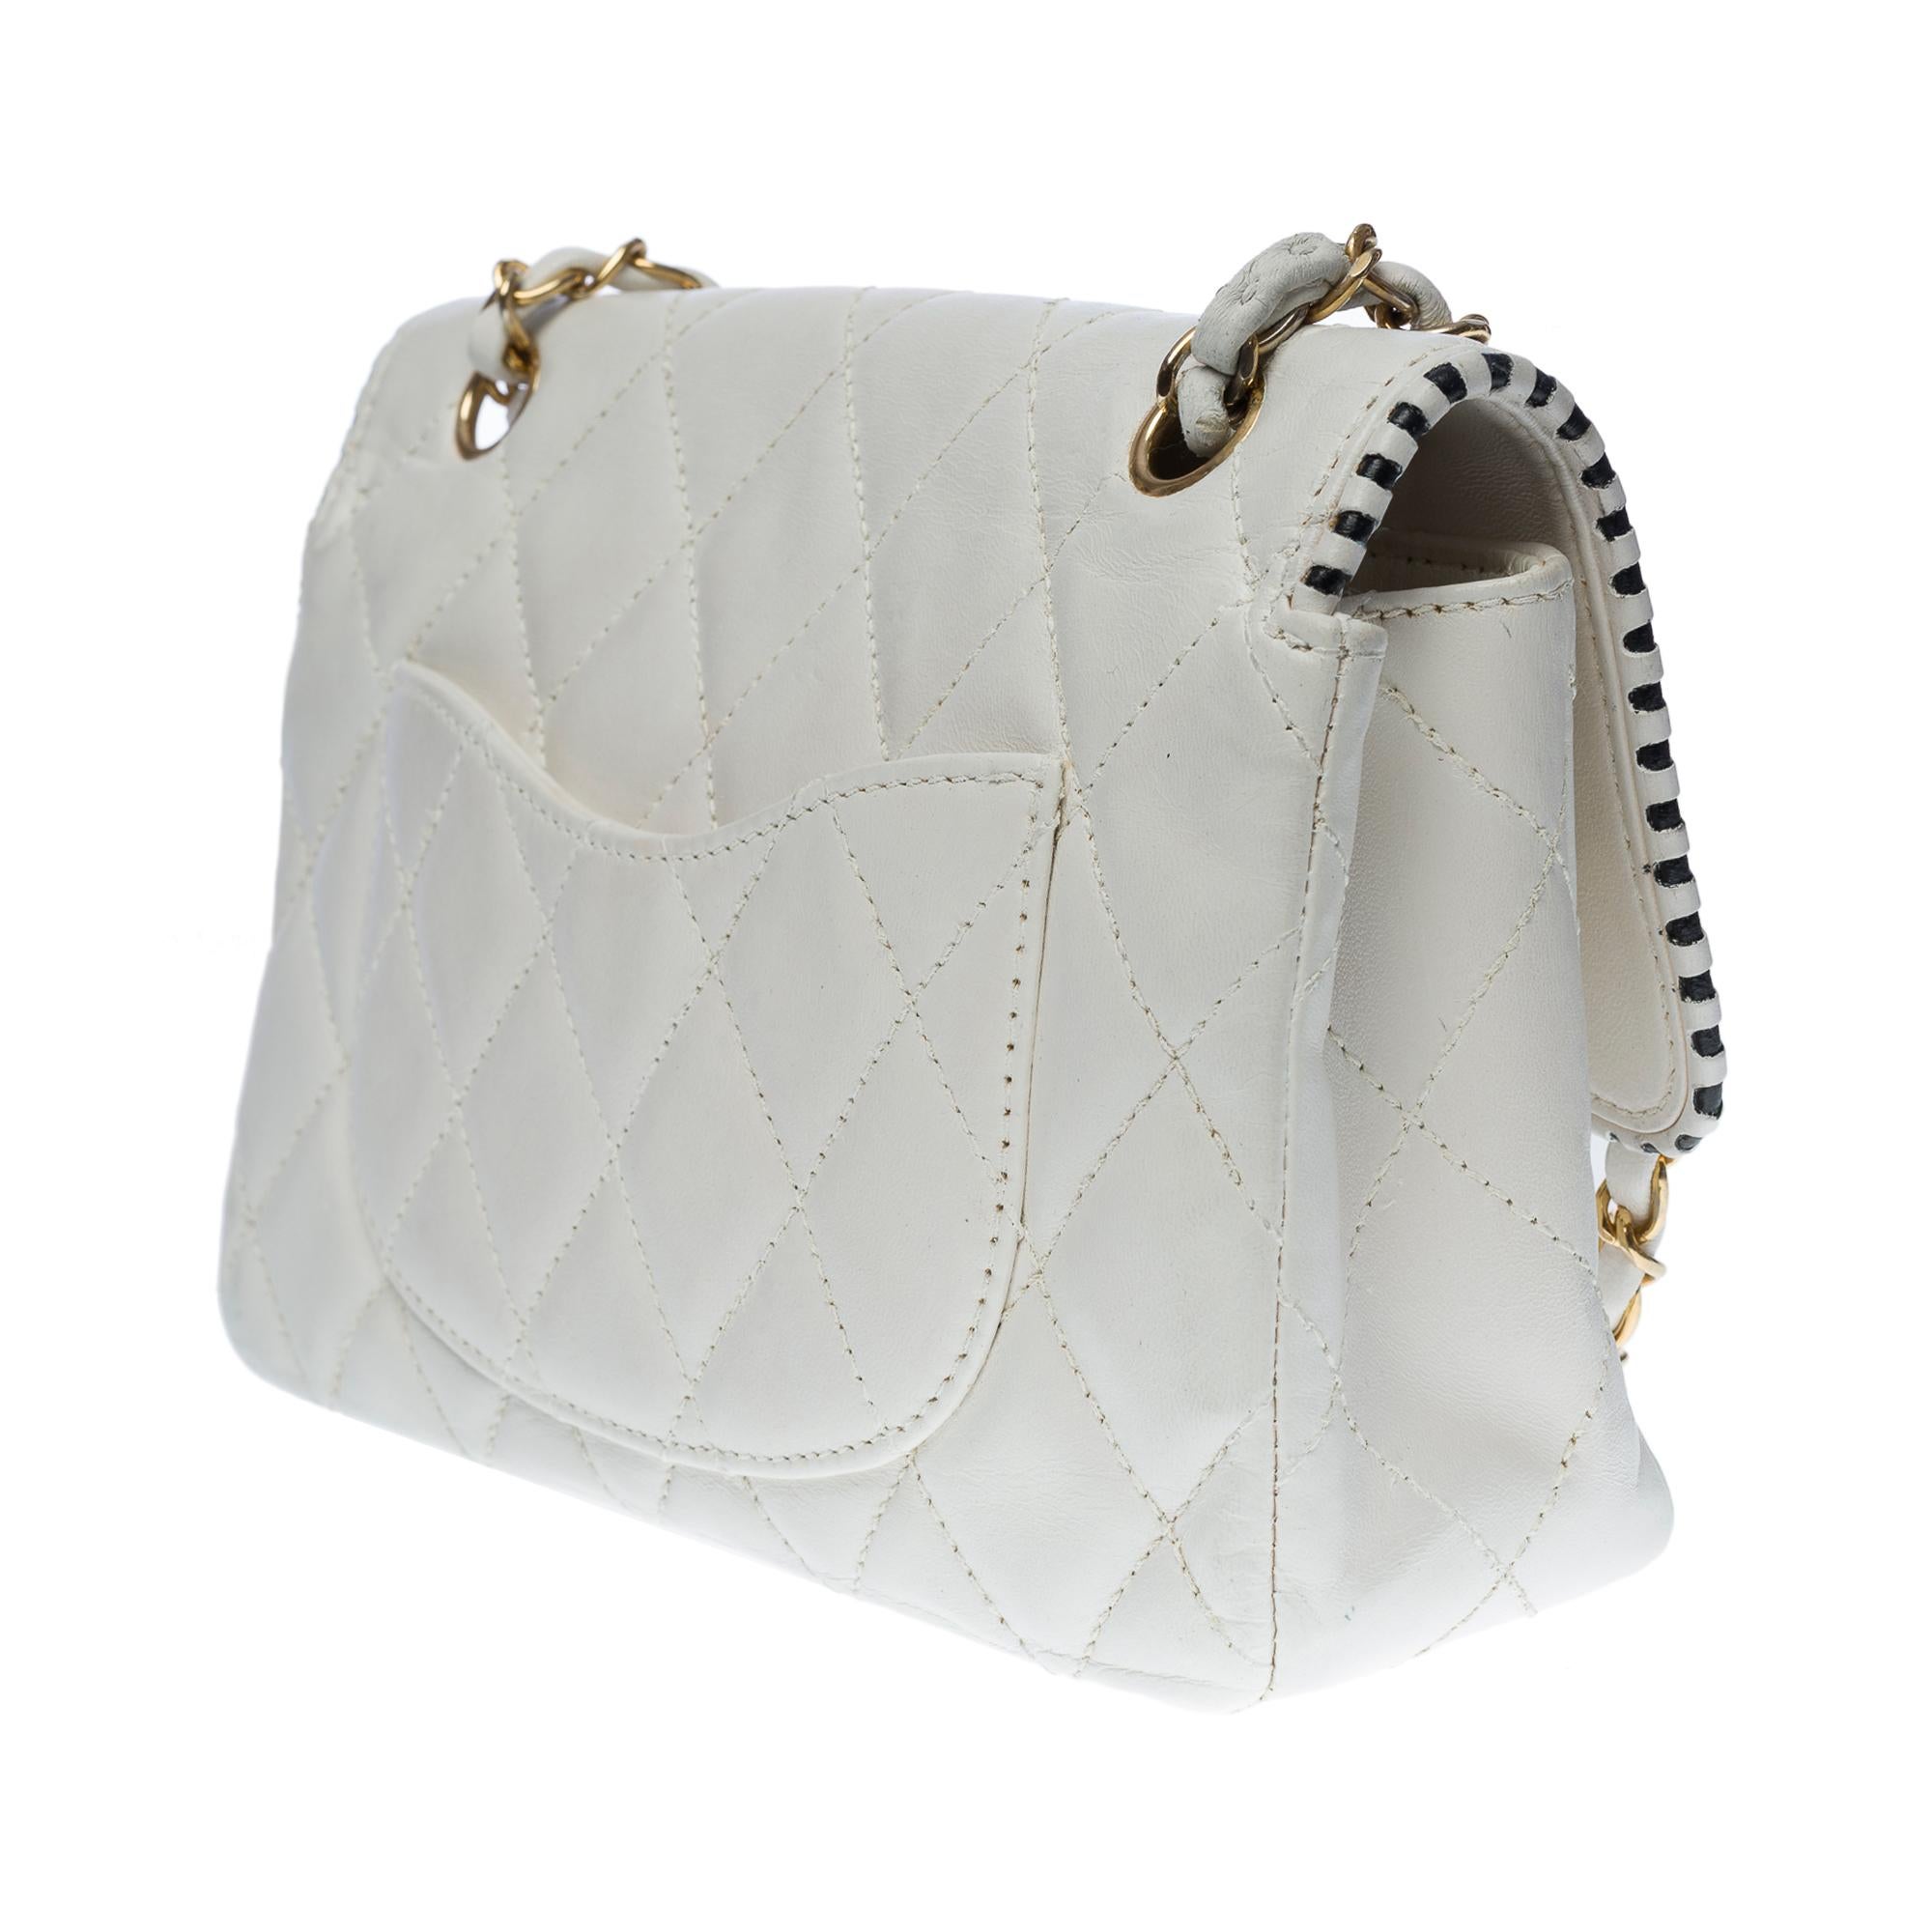 Women's Chanel Timeless Medium single flap shoulder bag in white quilted leather, GHW For Sale